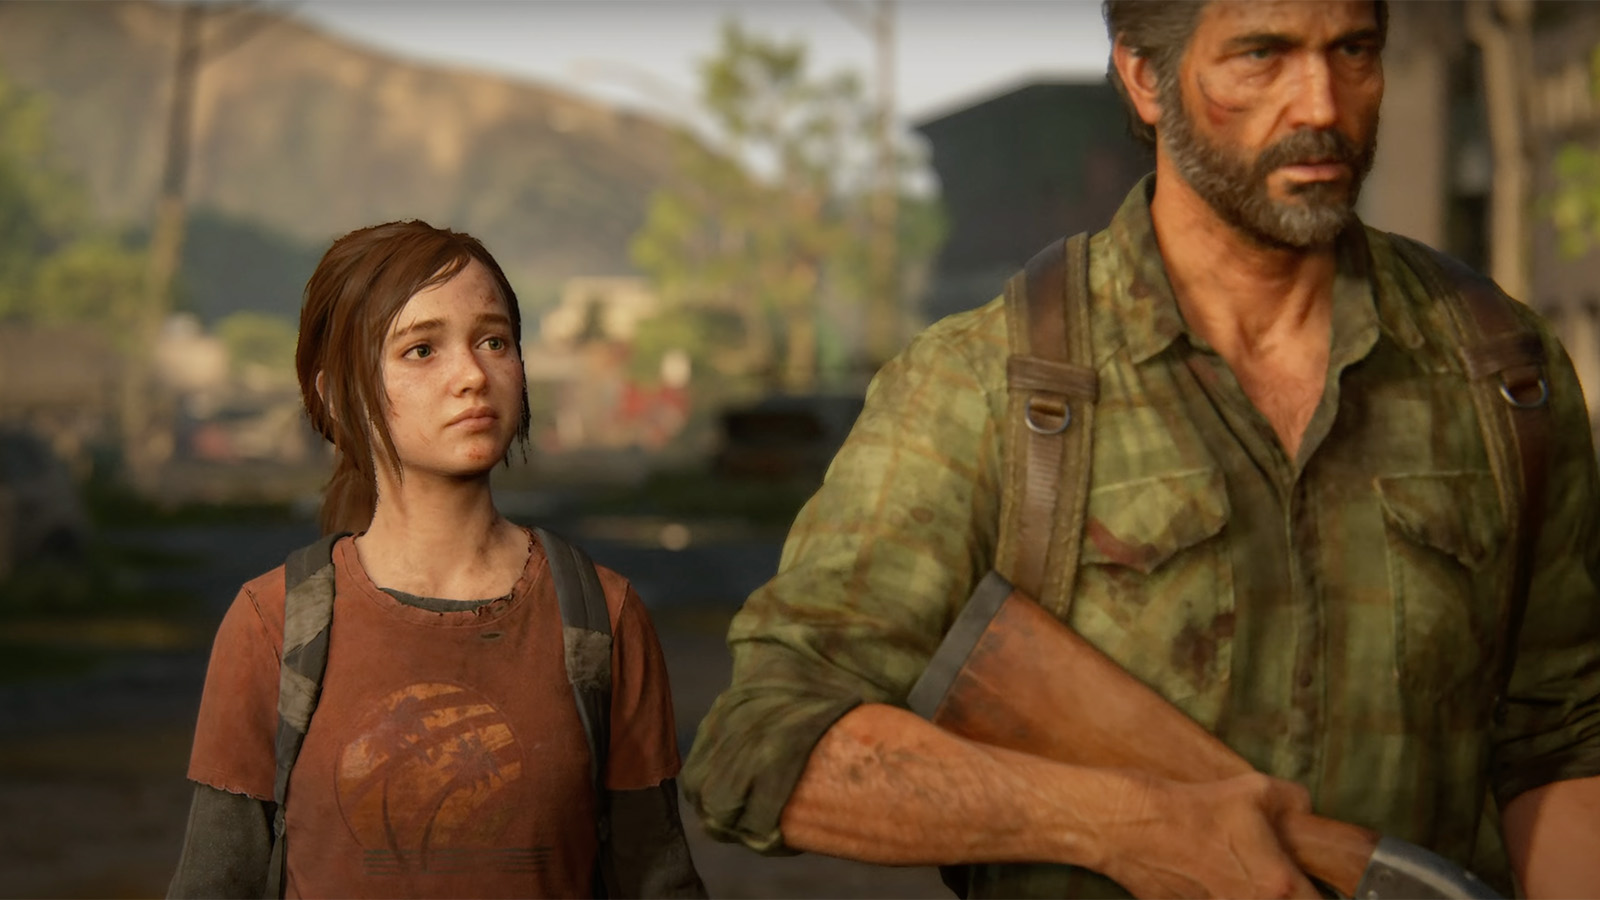 Naughty Dog Says Multiplayer Game Needs ‘More Time’, Confirms New Single-Player Experience